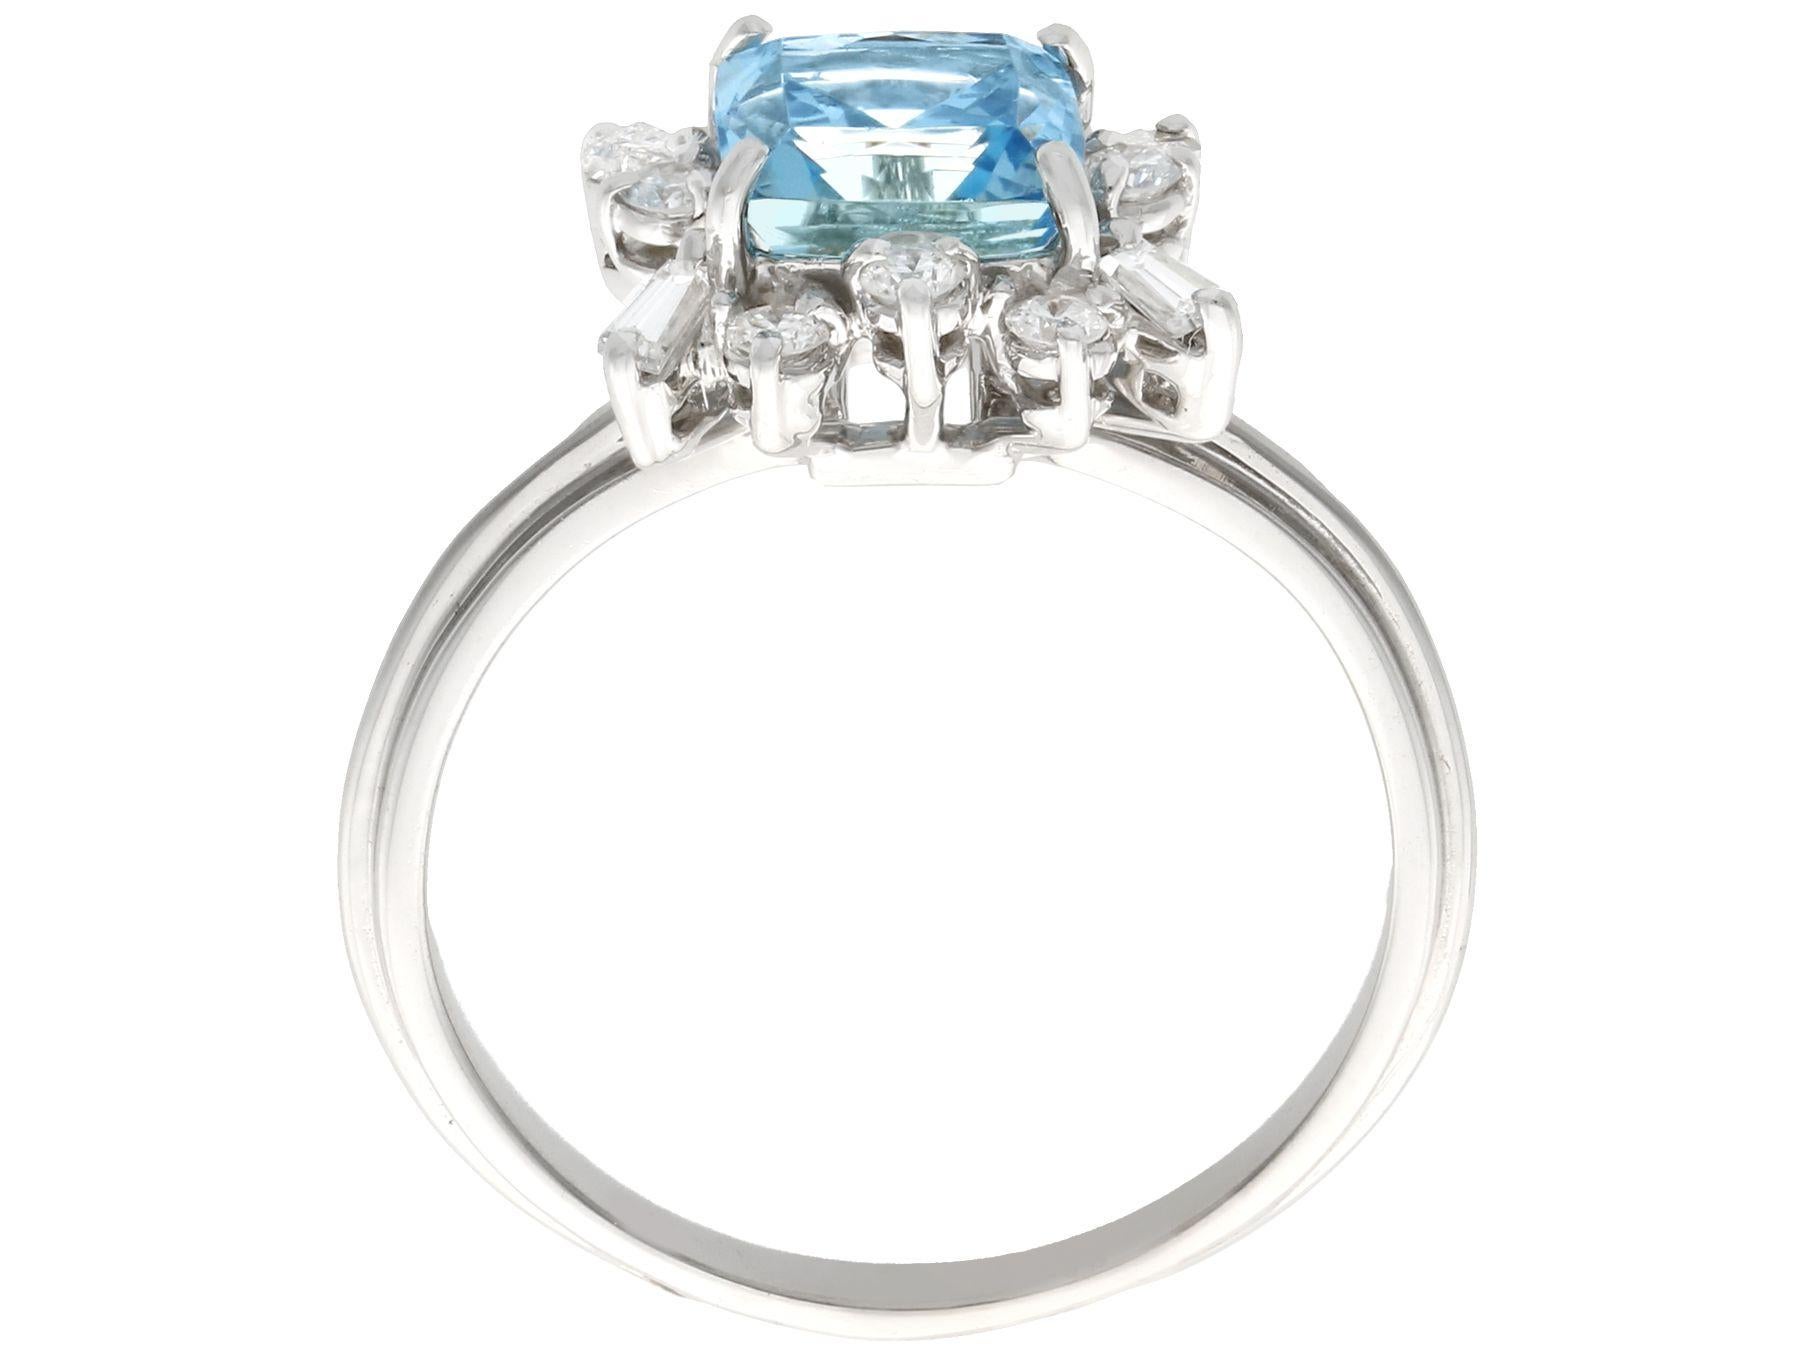 Vintage 1.77 Carat Aquamarine and Diamond White Gold Cocktail Ring In Excellent Condition For Sale In Jesmond, Newcastle Upon Tyne